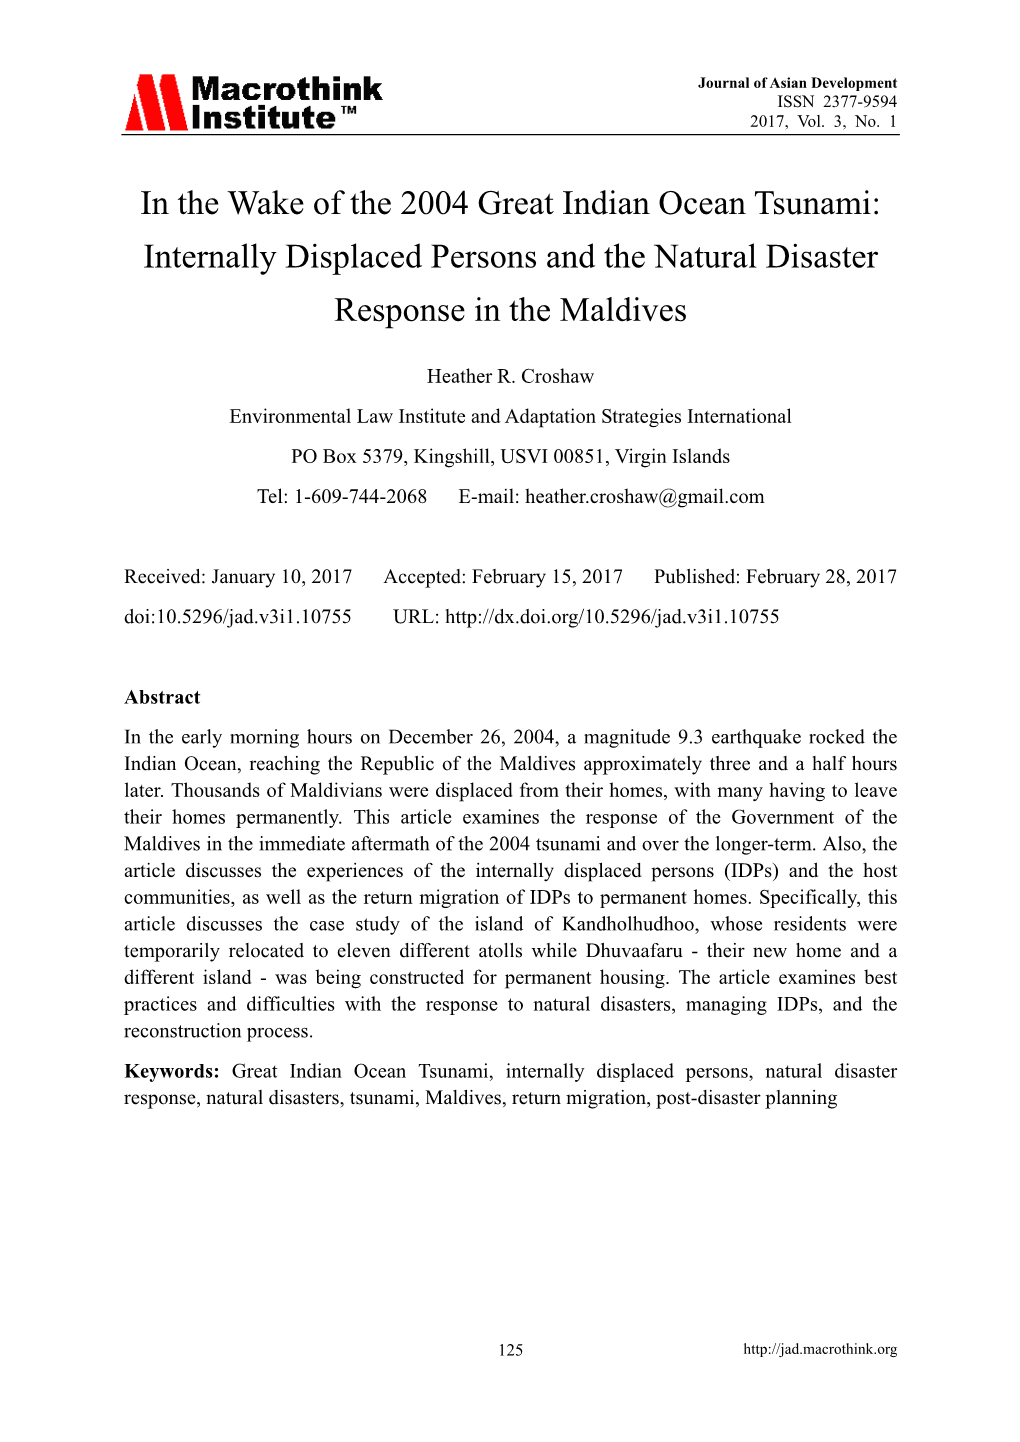 In the Wake of the 2004 Great Indian Ocean Tsunami: Internally Displaced Persons and the Natural Disaster Response in the Maldives